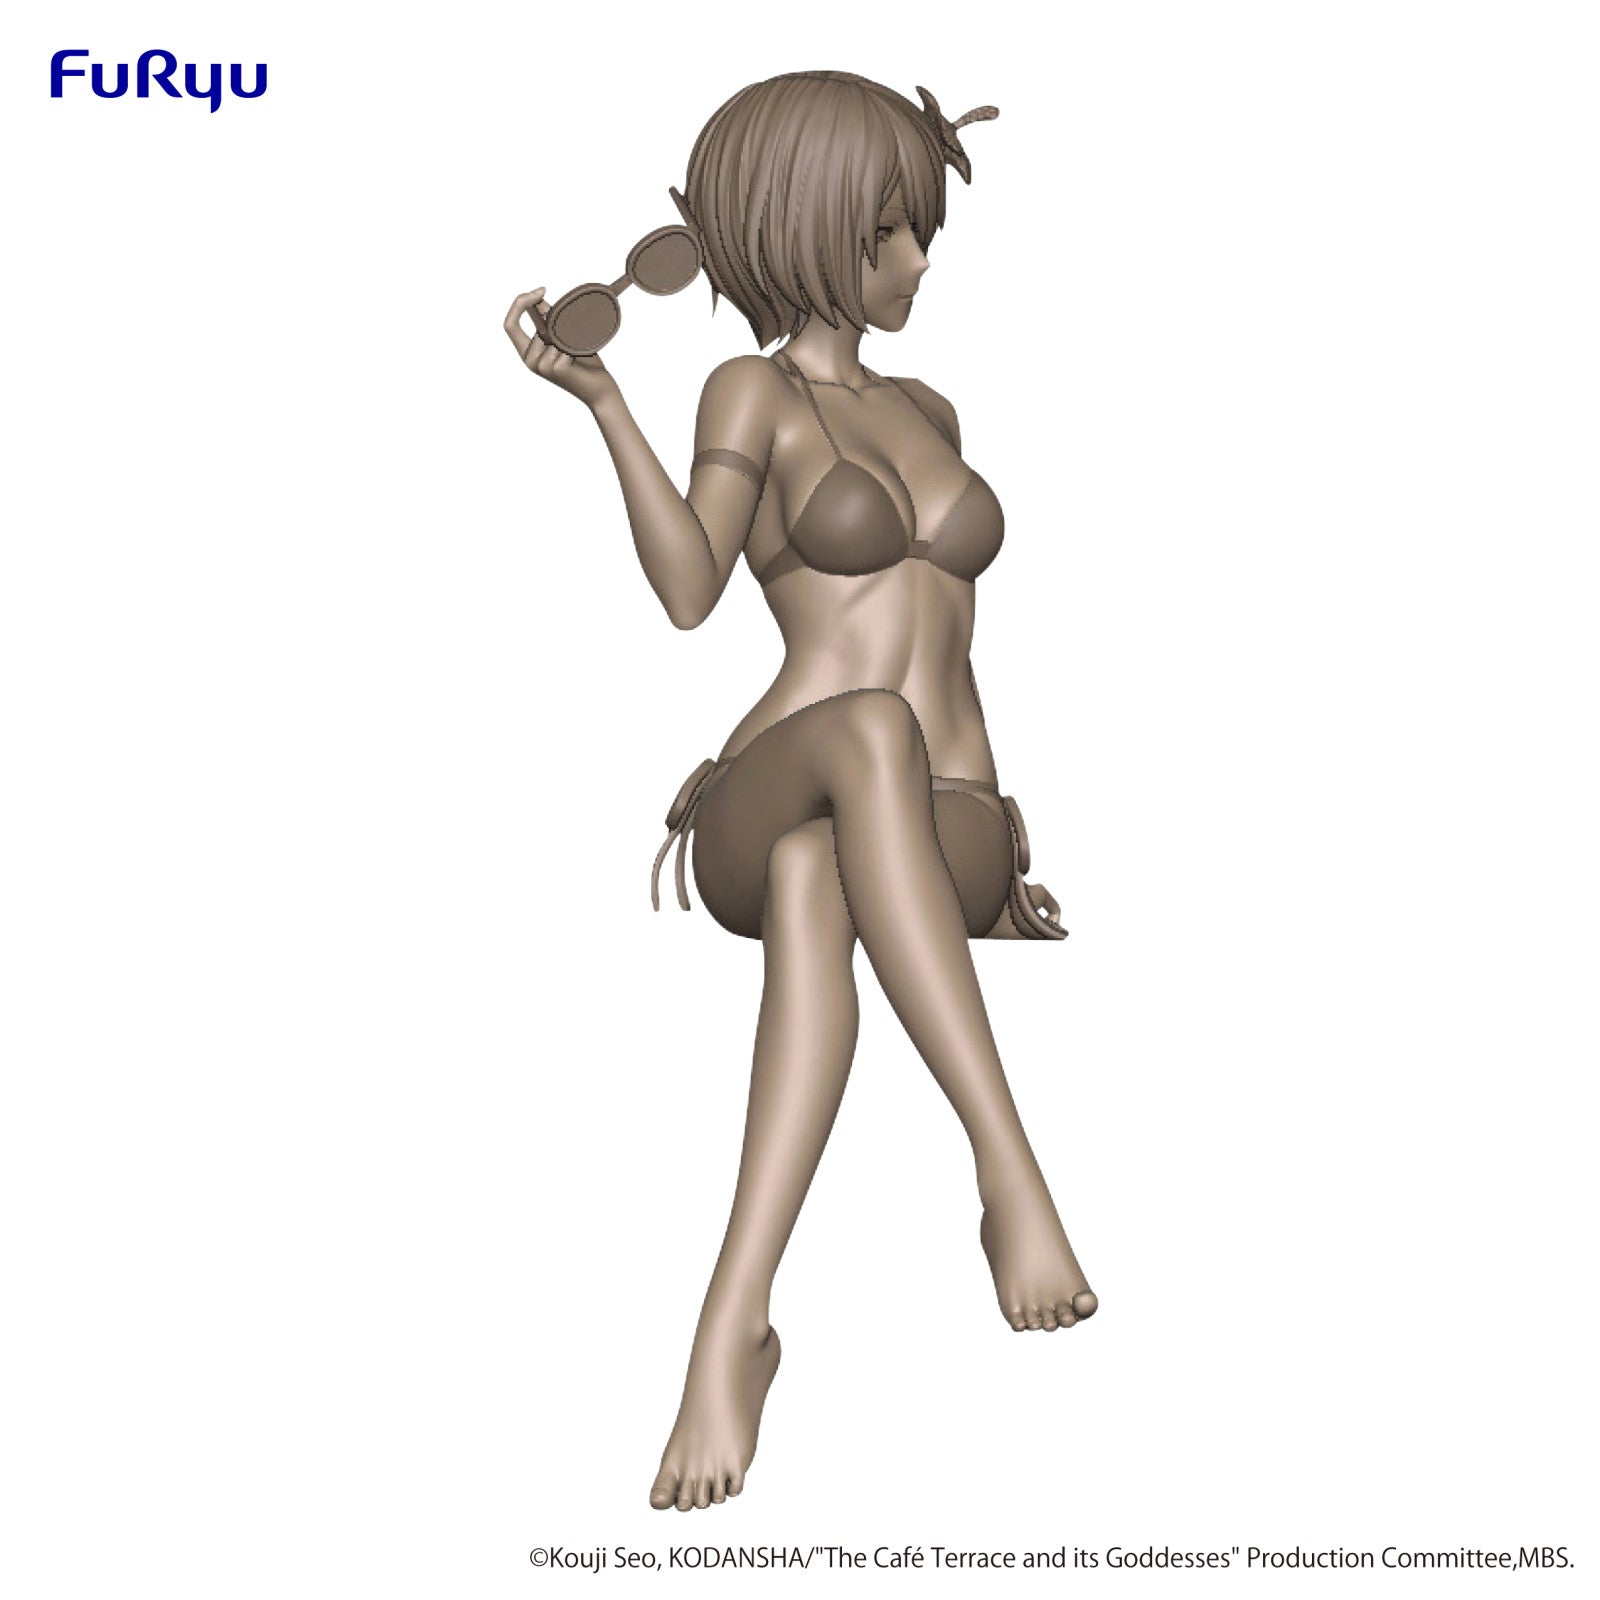 The Cafe Terrace and its Goddesses: NOODLE STOPPER FIGURE - Akane Hououji